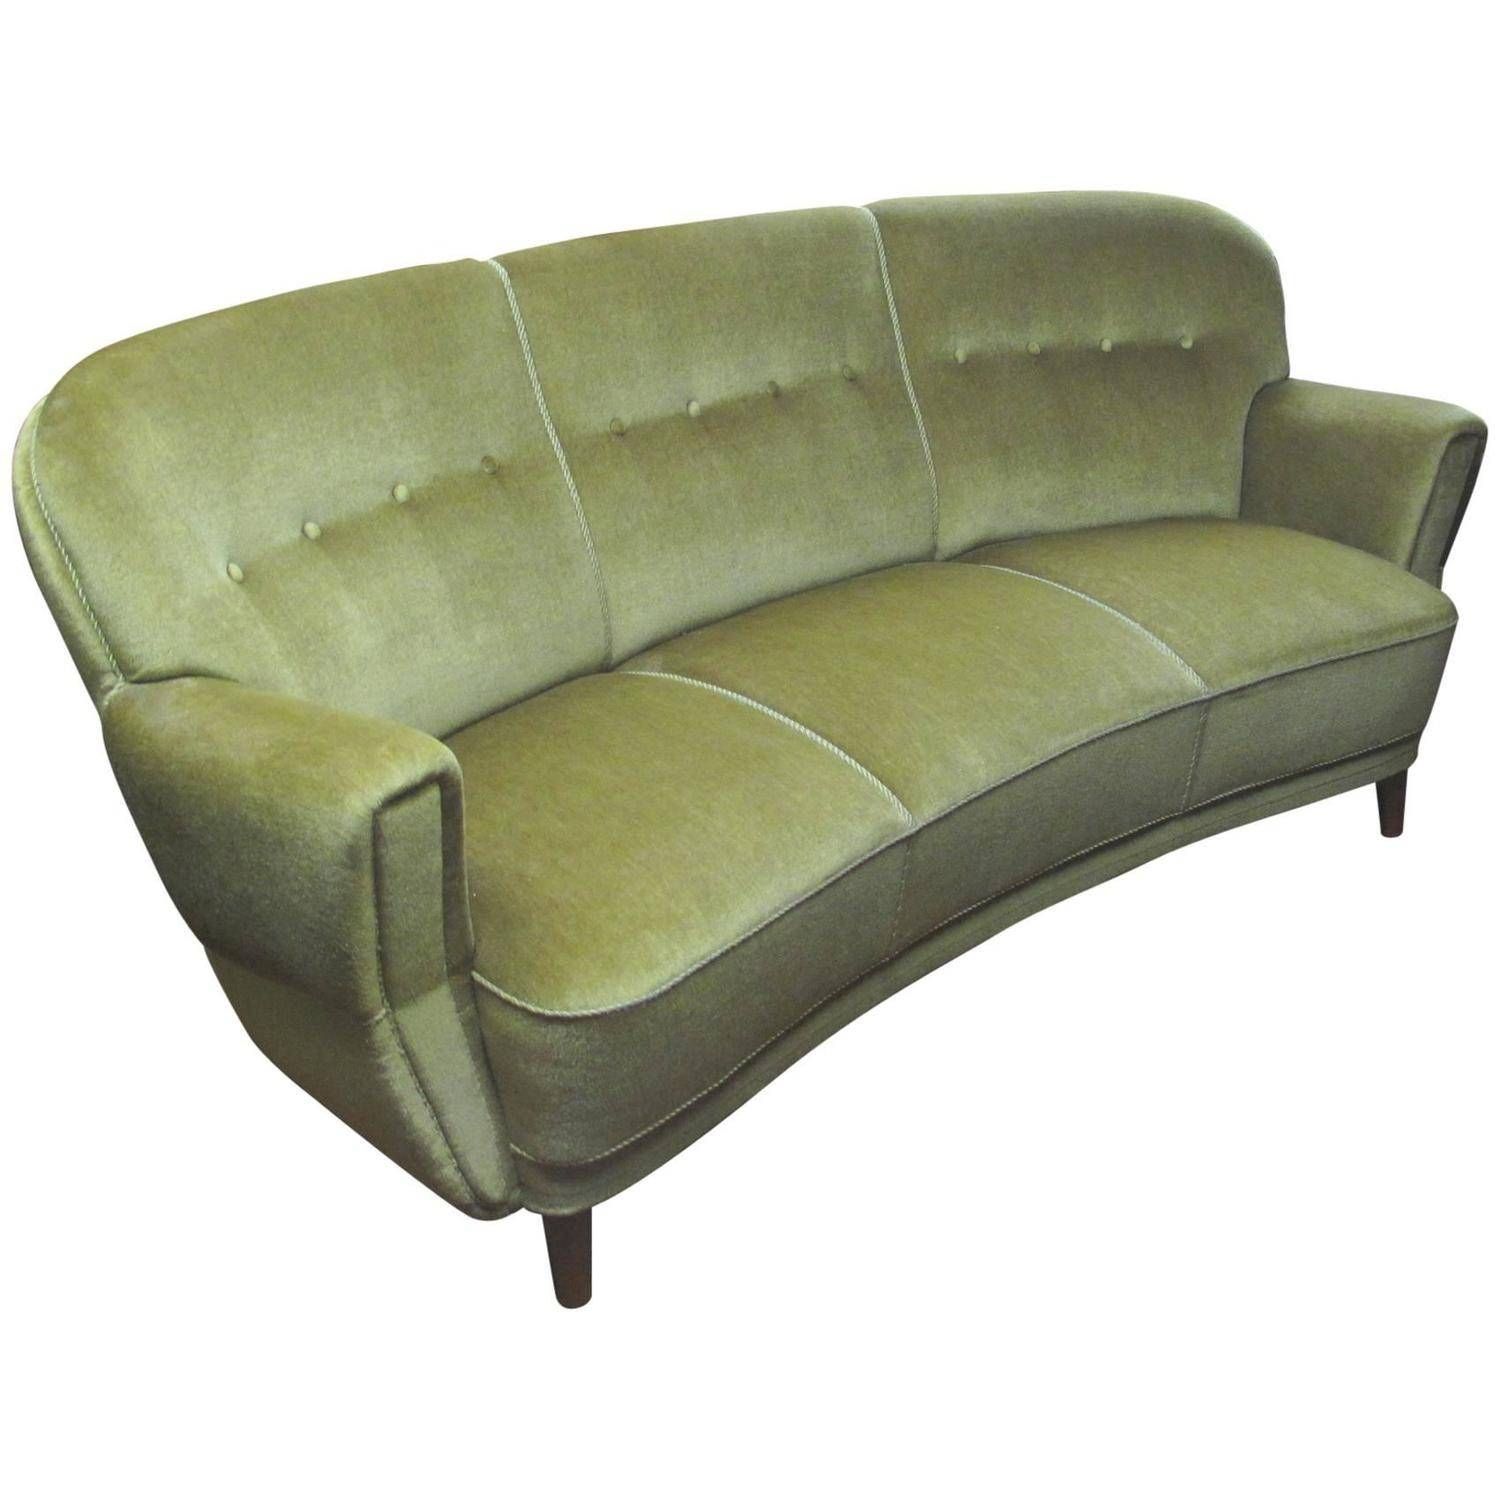 Danish 1930s 1940s Curved Mohair Upholstered Sofa At 1stdibs Throughout 1930s Couch (Photo 175 of 299)